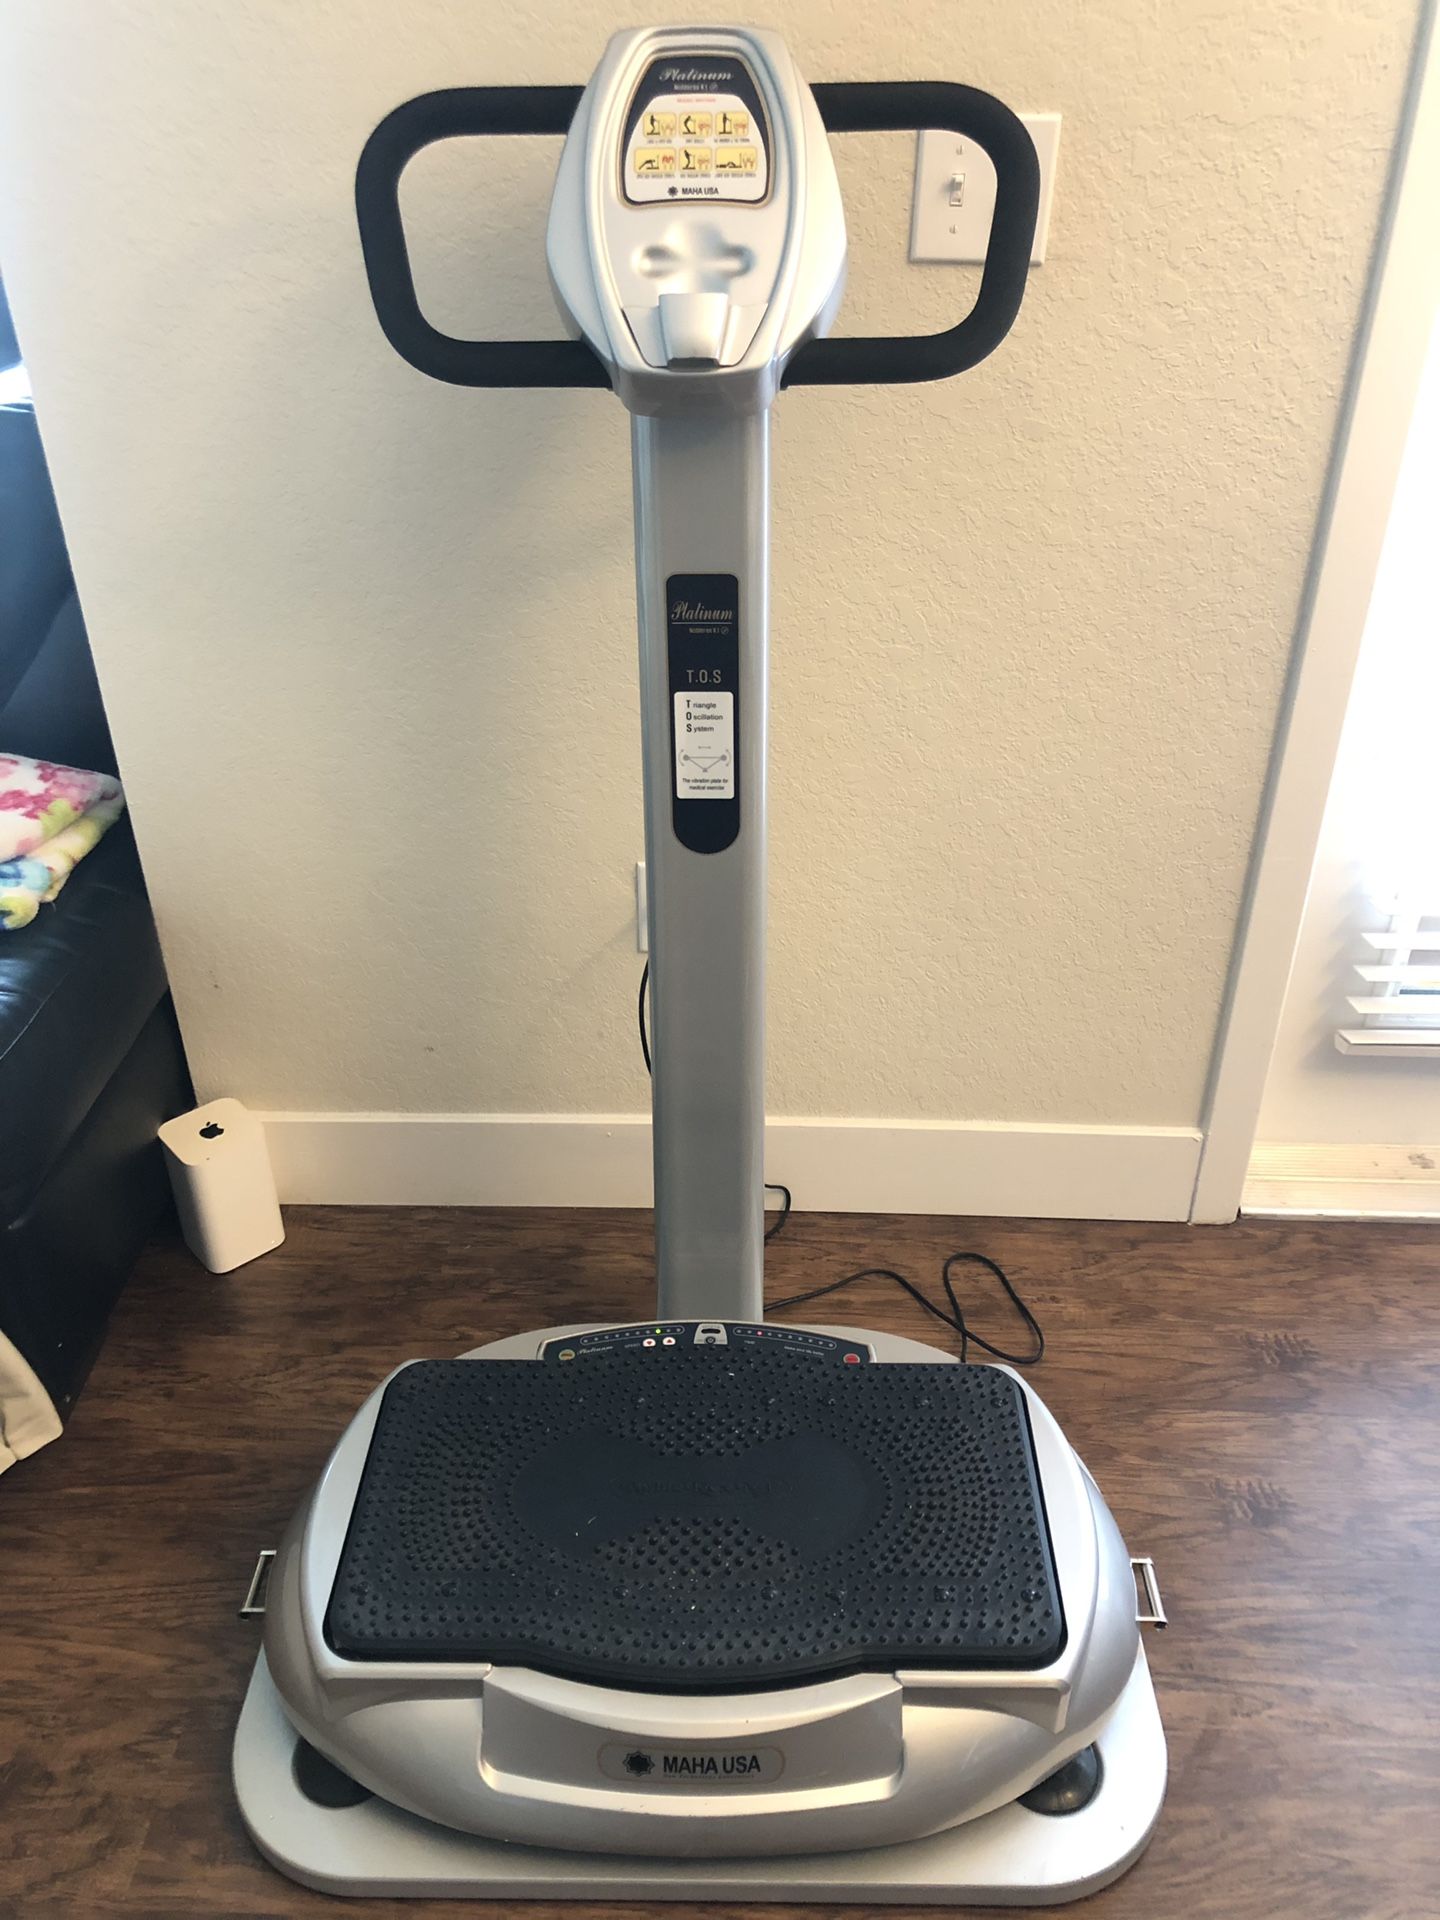 Platinum Noblerex K1 exercise machine made by Maha U.S.A. Can be used in multiple ways, for yoga, as a stairmaster or elliptical, and more.